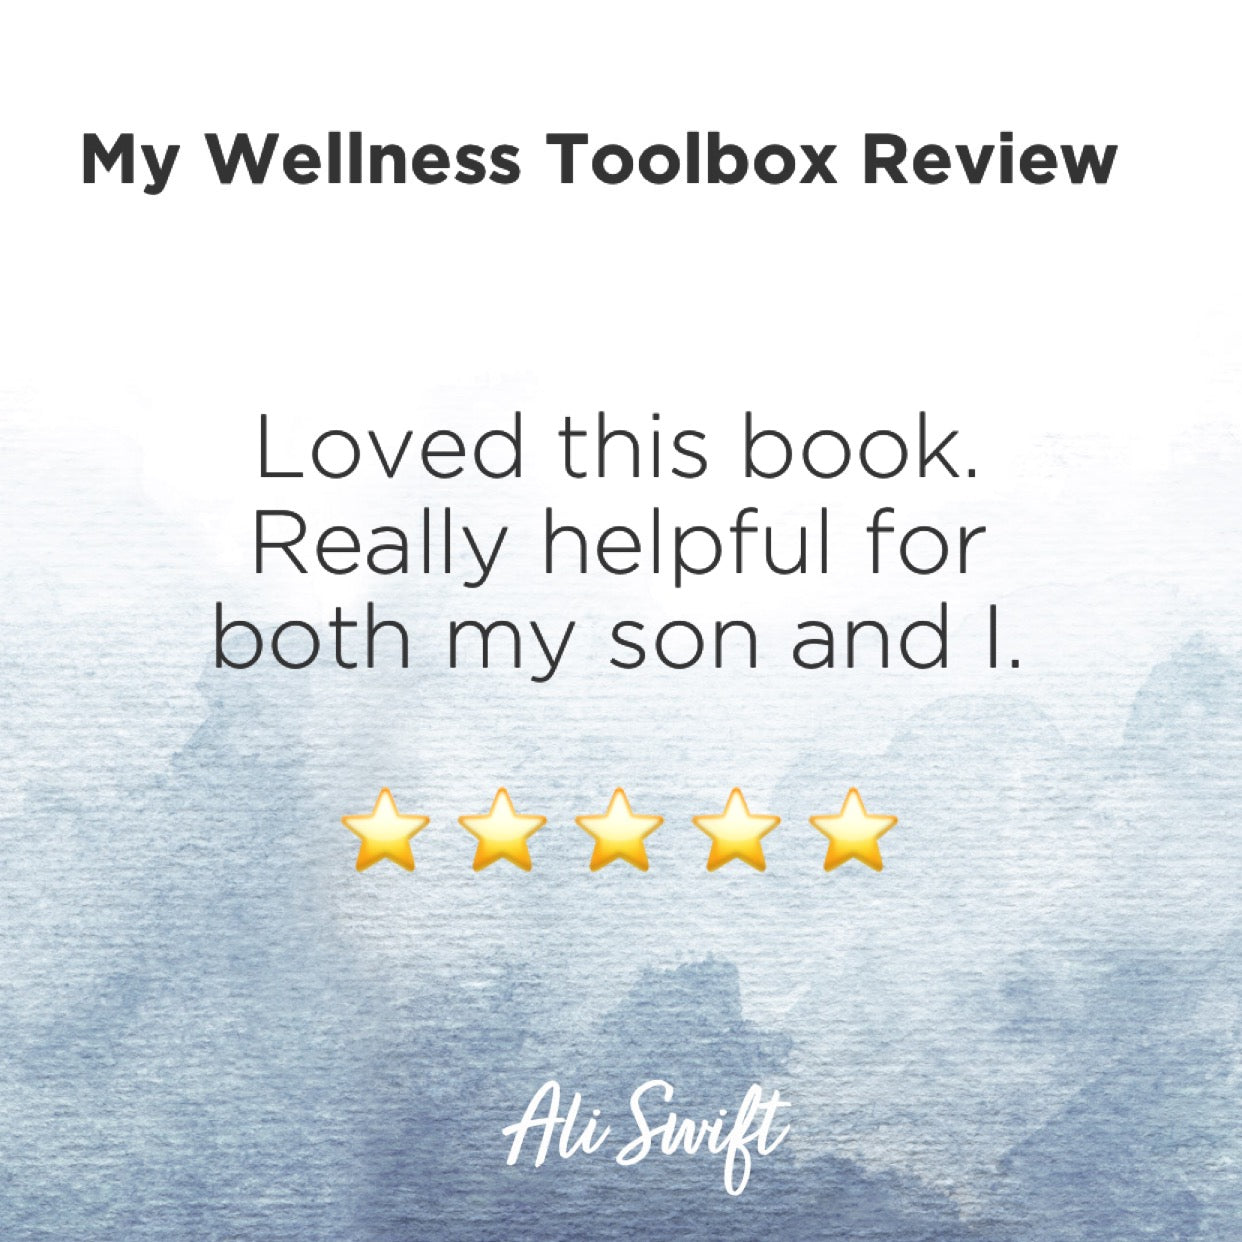 MY WELLNESS TOOLBOX FOR THE WHOLE FAMILY